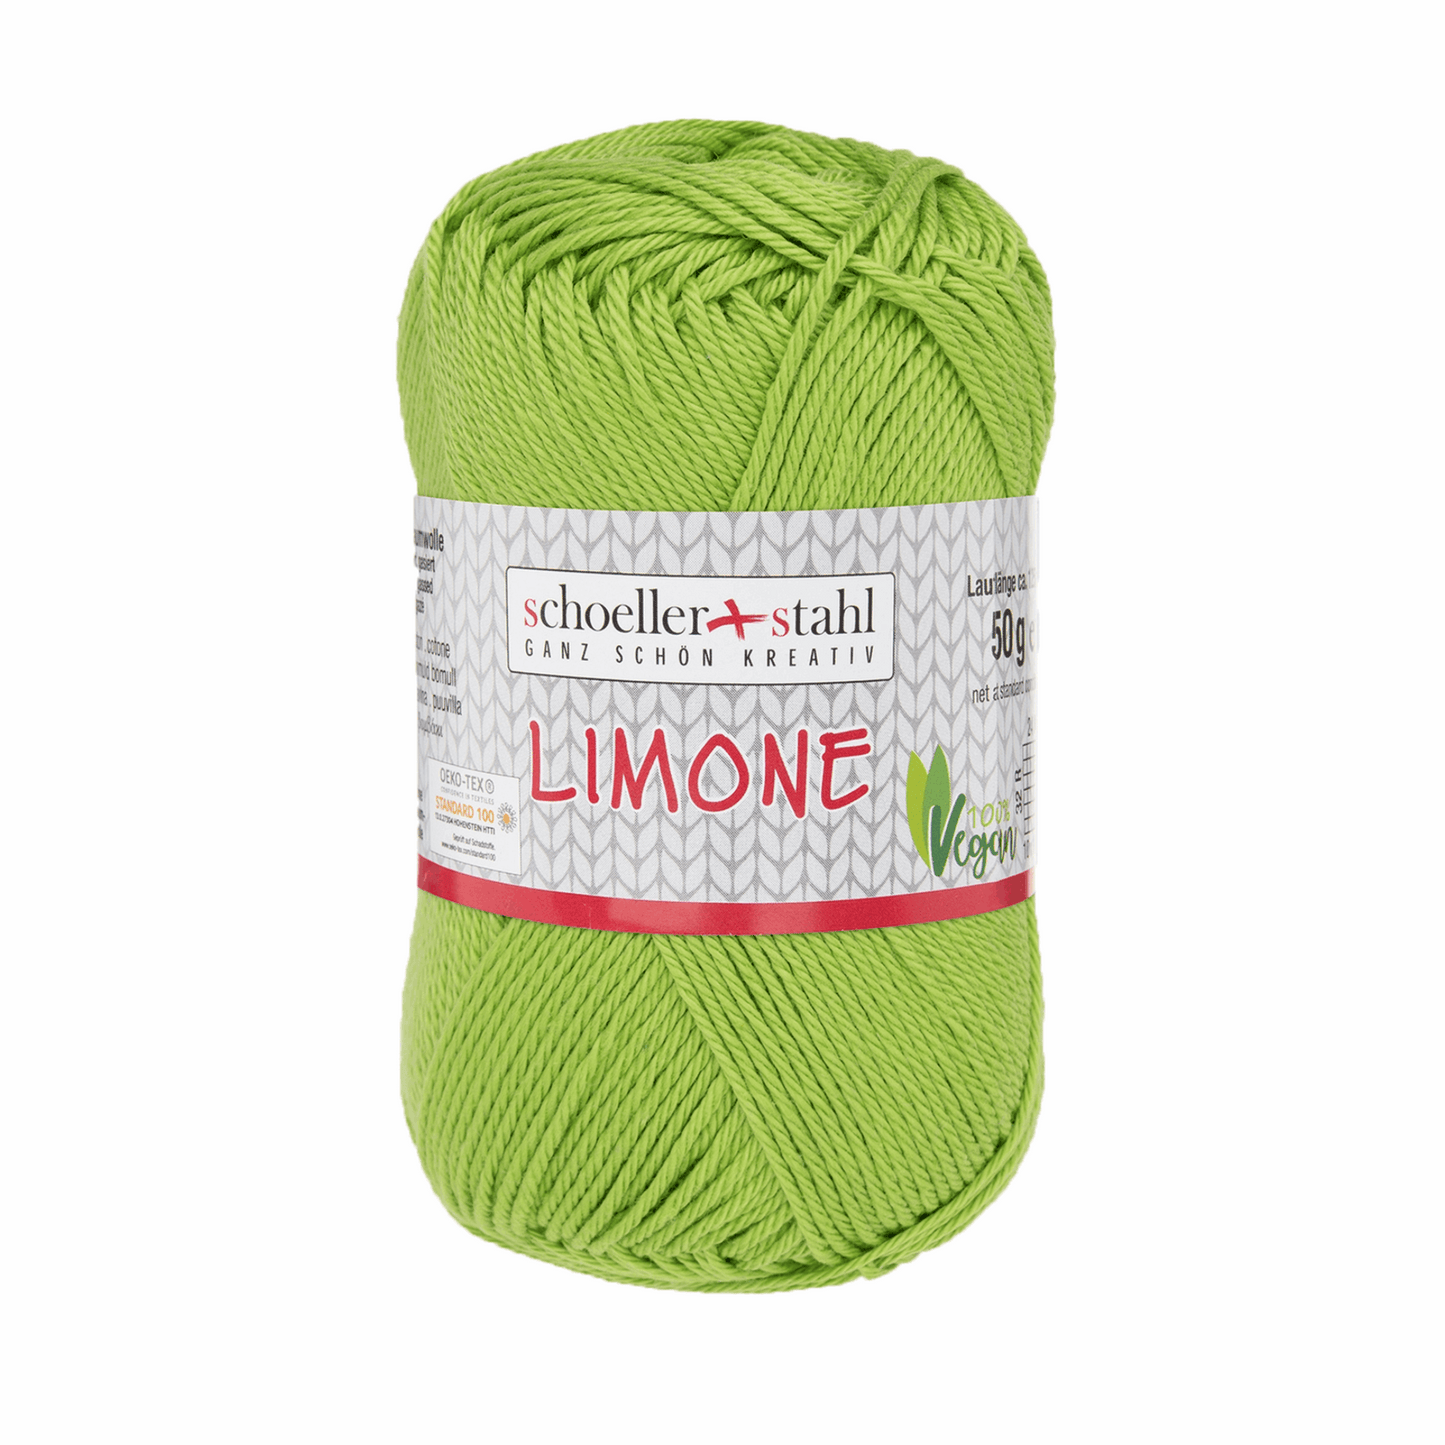 Lime 50g, 90130, color 145, may green